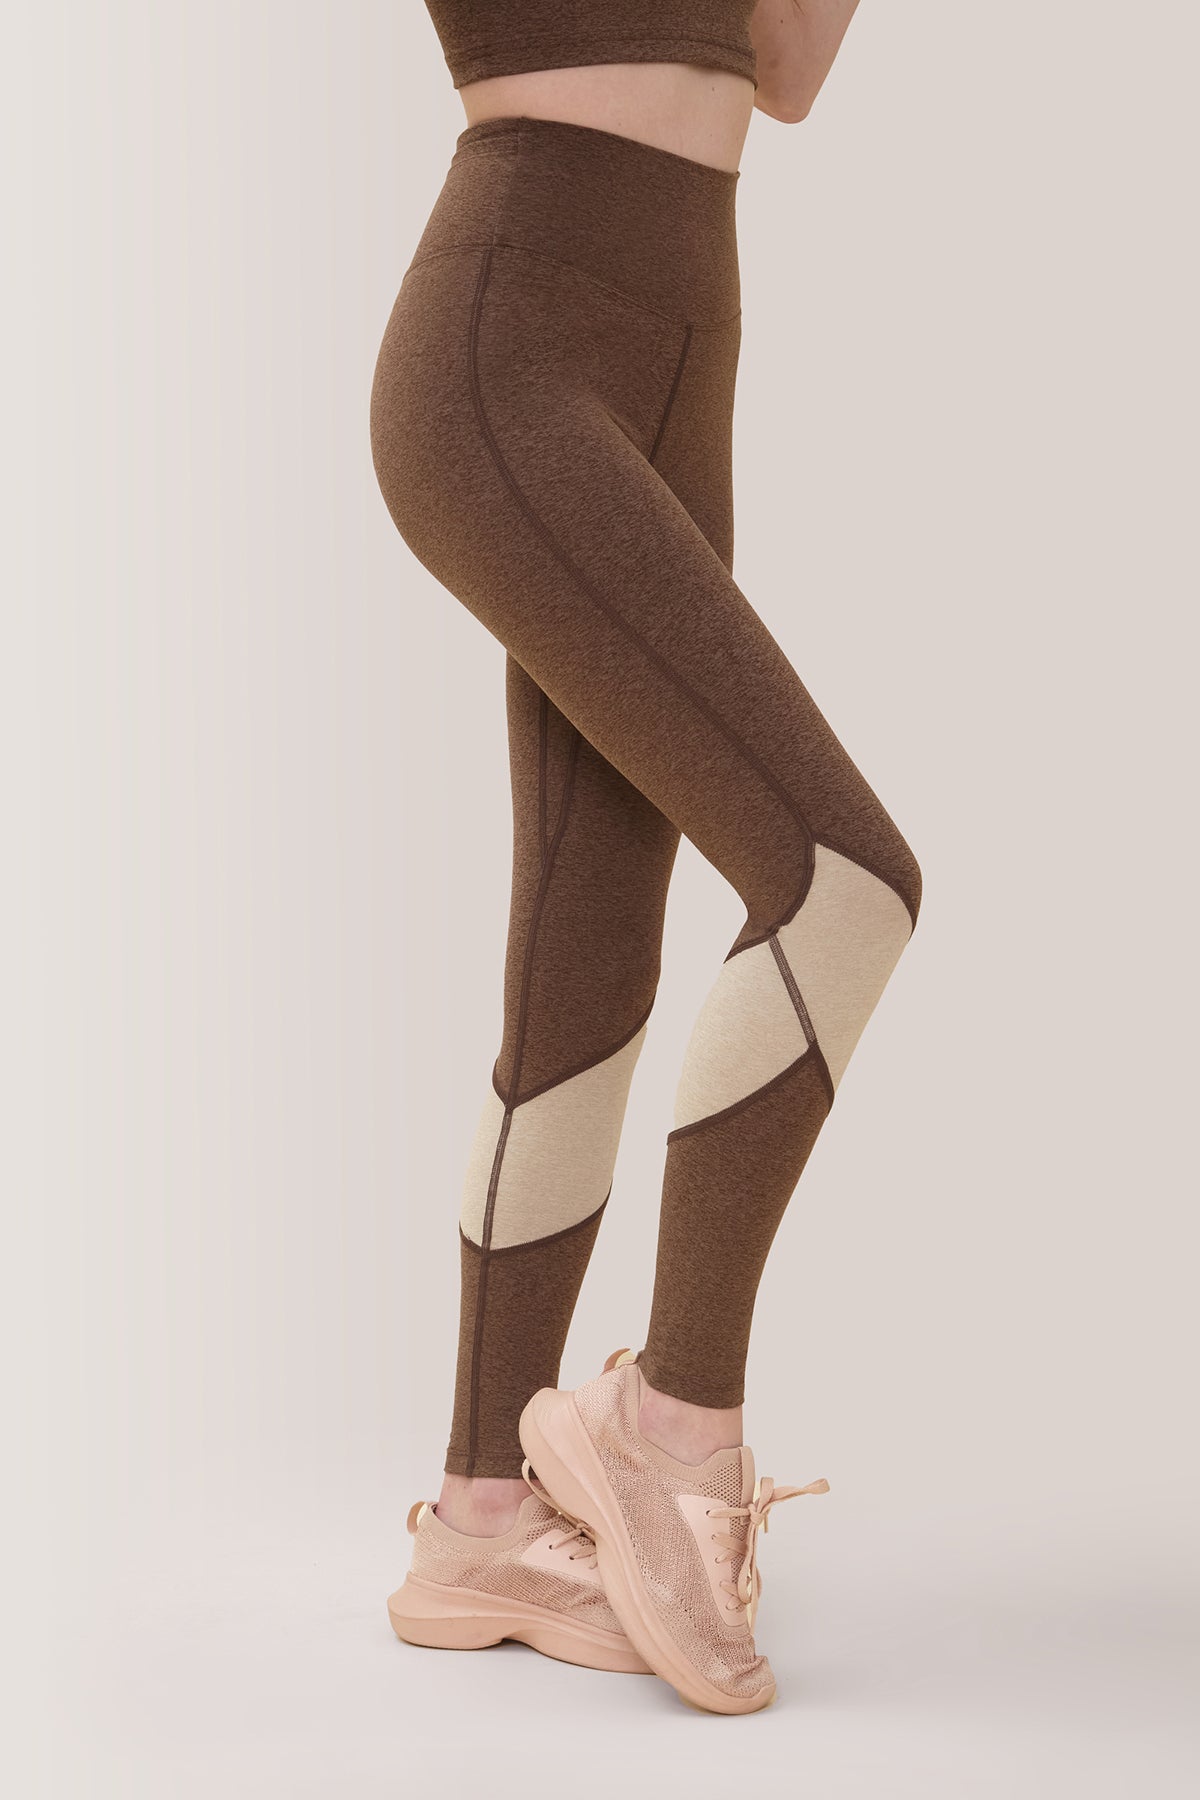 Femme qui porte les leggings Buttery Soft BFF High-Rise Keep Moving de Rose Boreal./ Women wearing the buttery soft BFF high-rise Keep Moving leggings from Rose Boreal. -Truffle